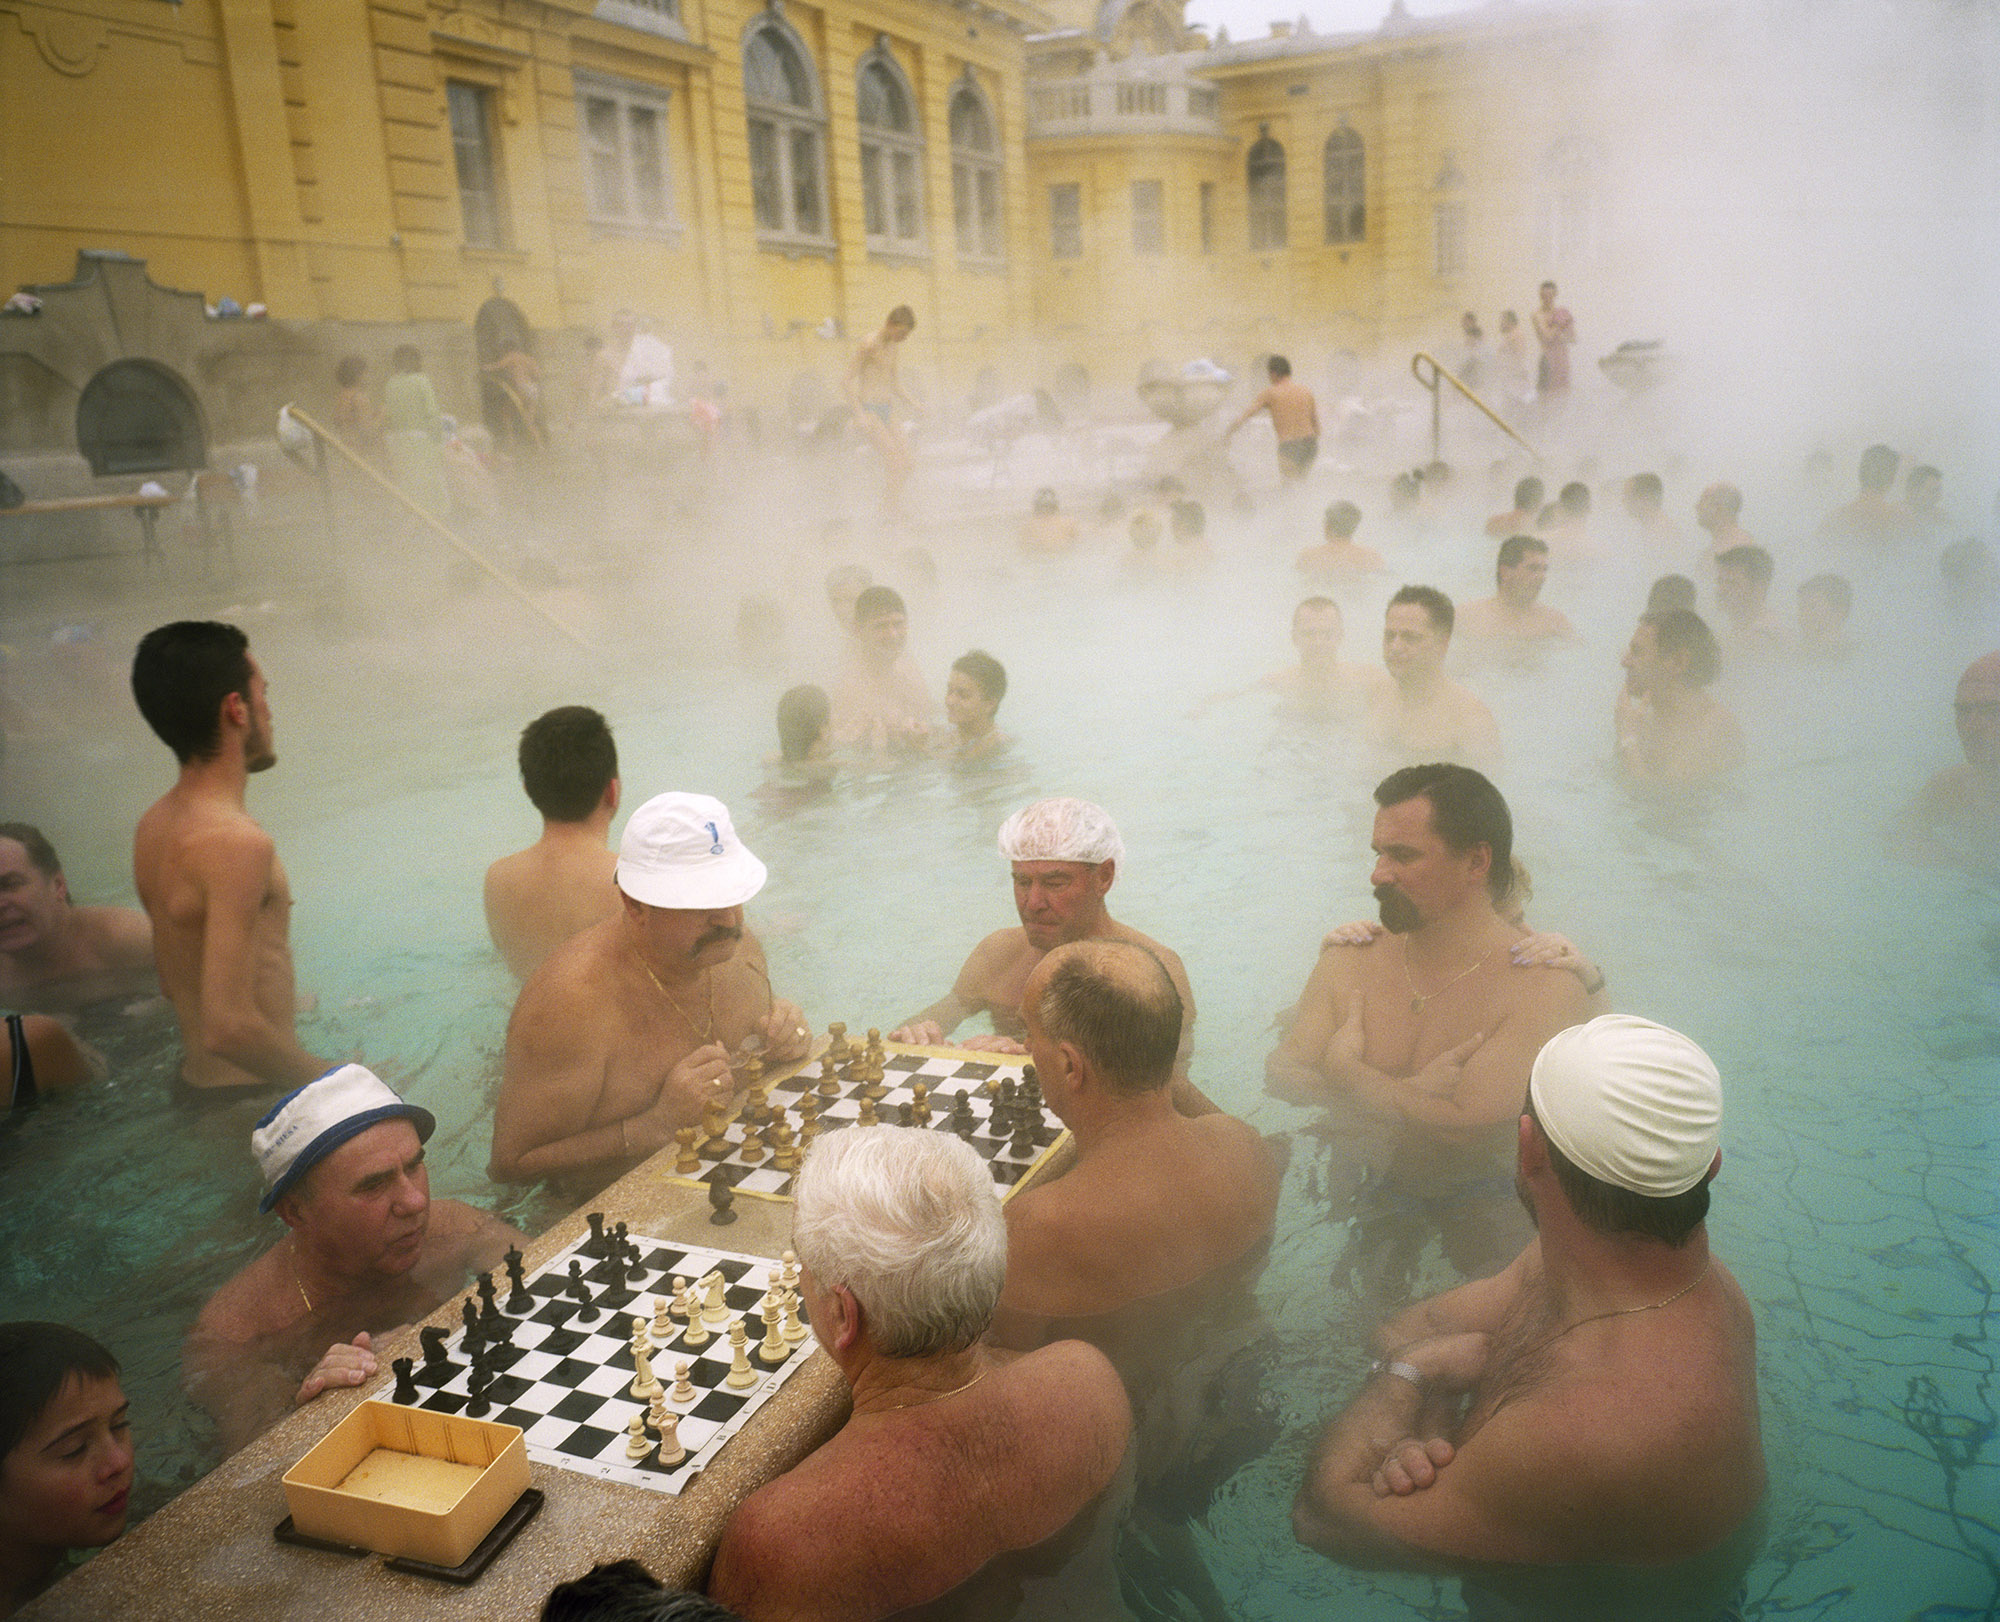 HUNGARY. Budapest. Szechenyi thermal baths. Taken in the New Year. 2000.